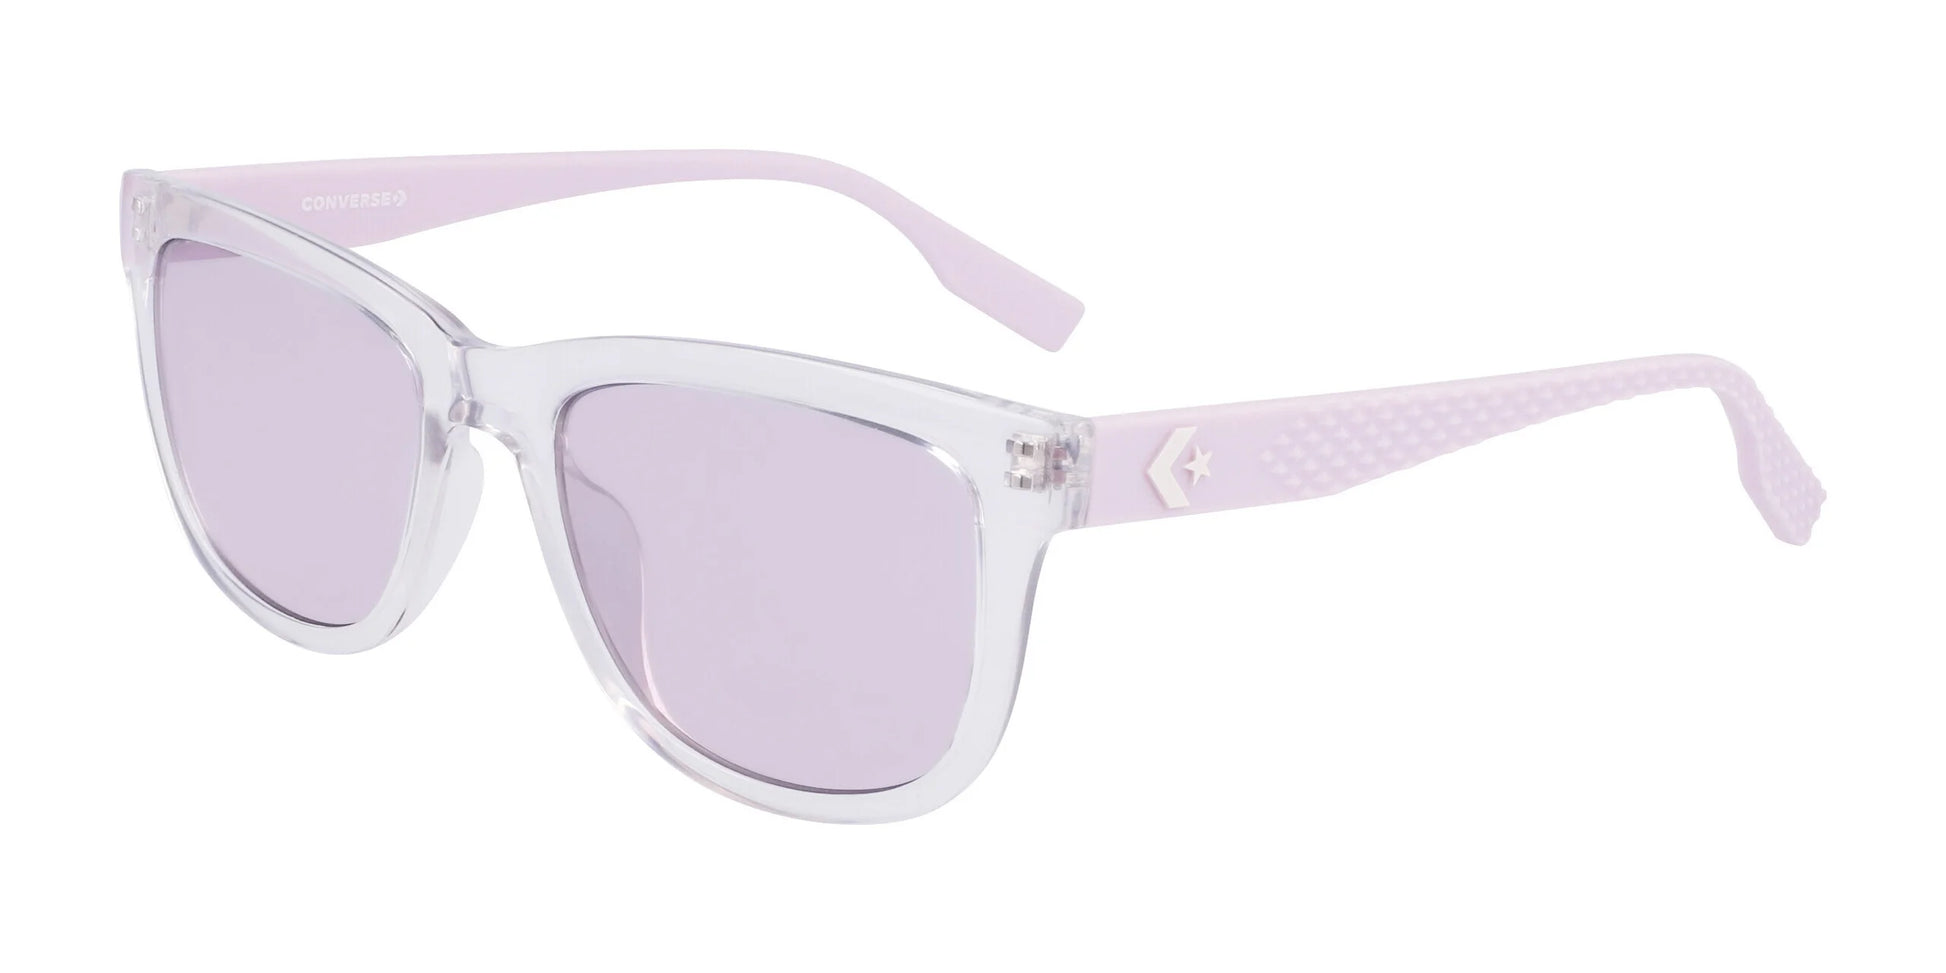 Converse CV531SY FORCE Sunglasses Crystal Clear